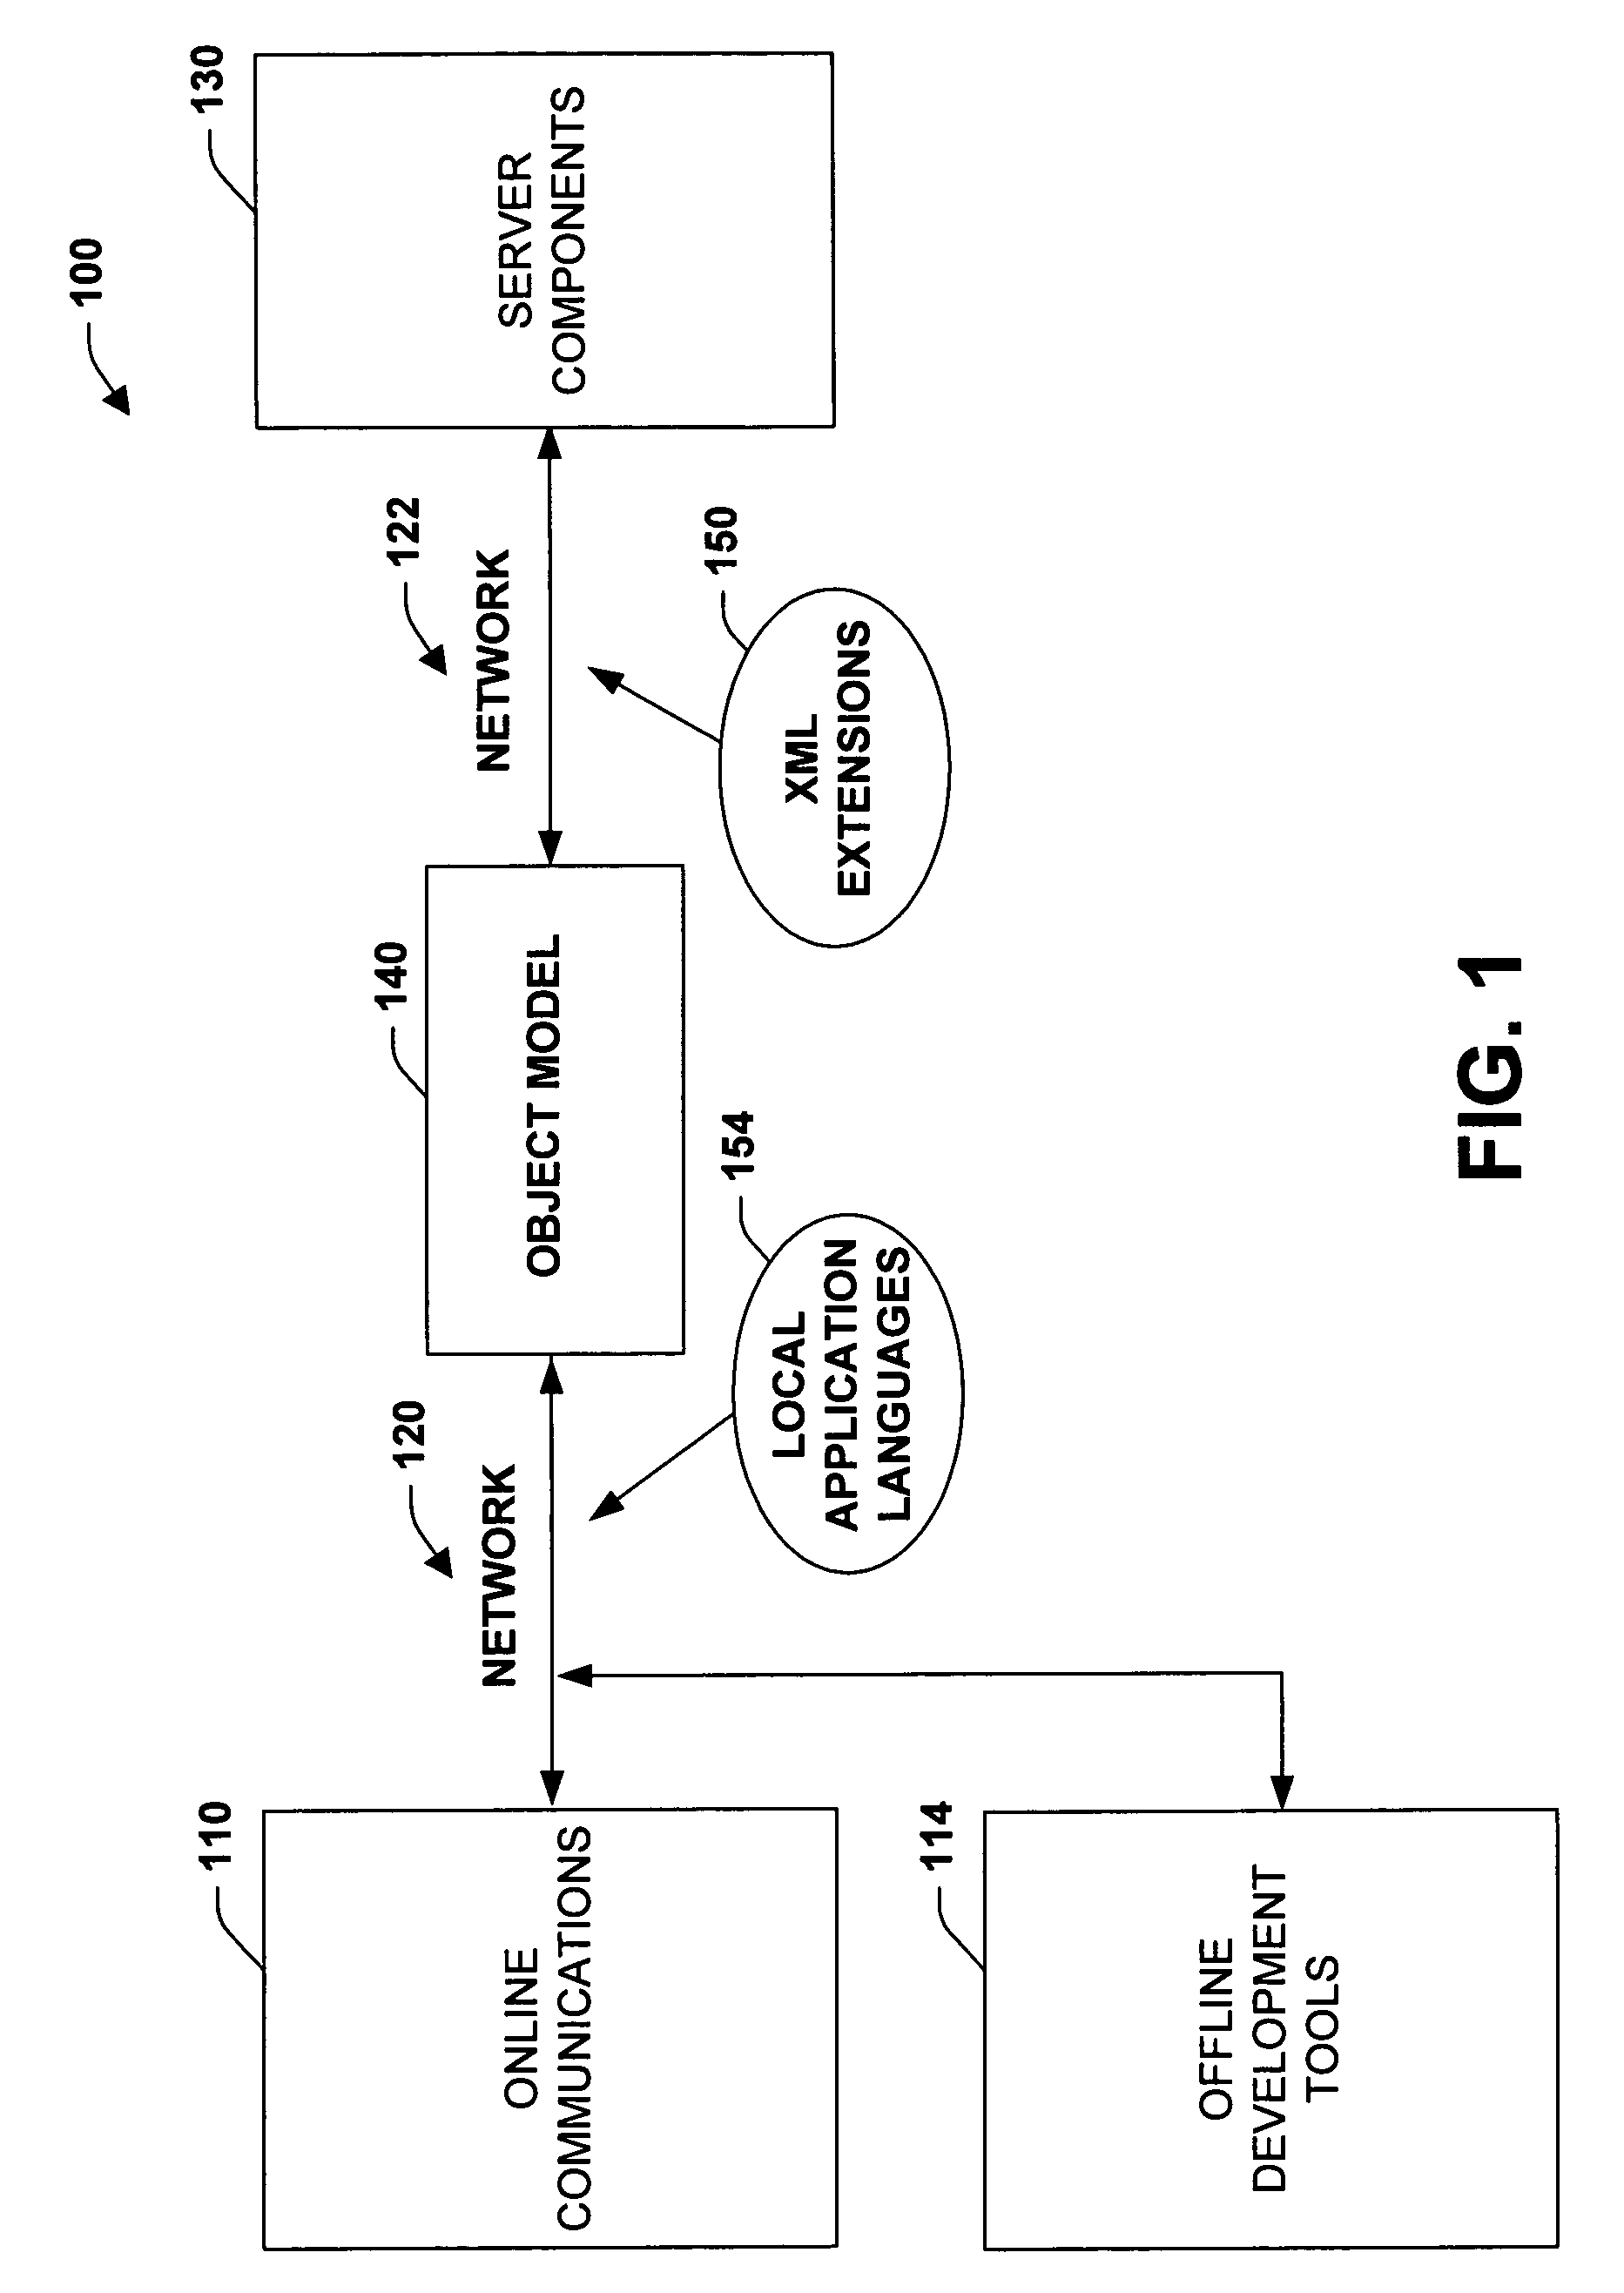 Systems and methods to facilitate utilization of database modeling